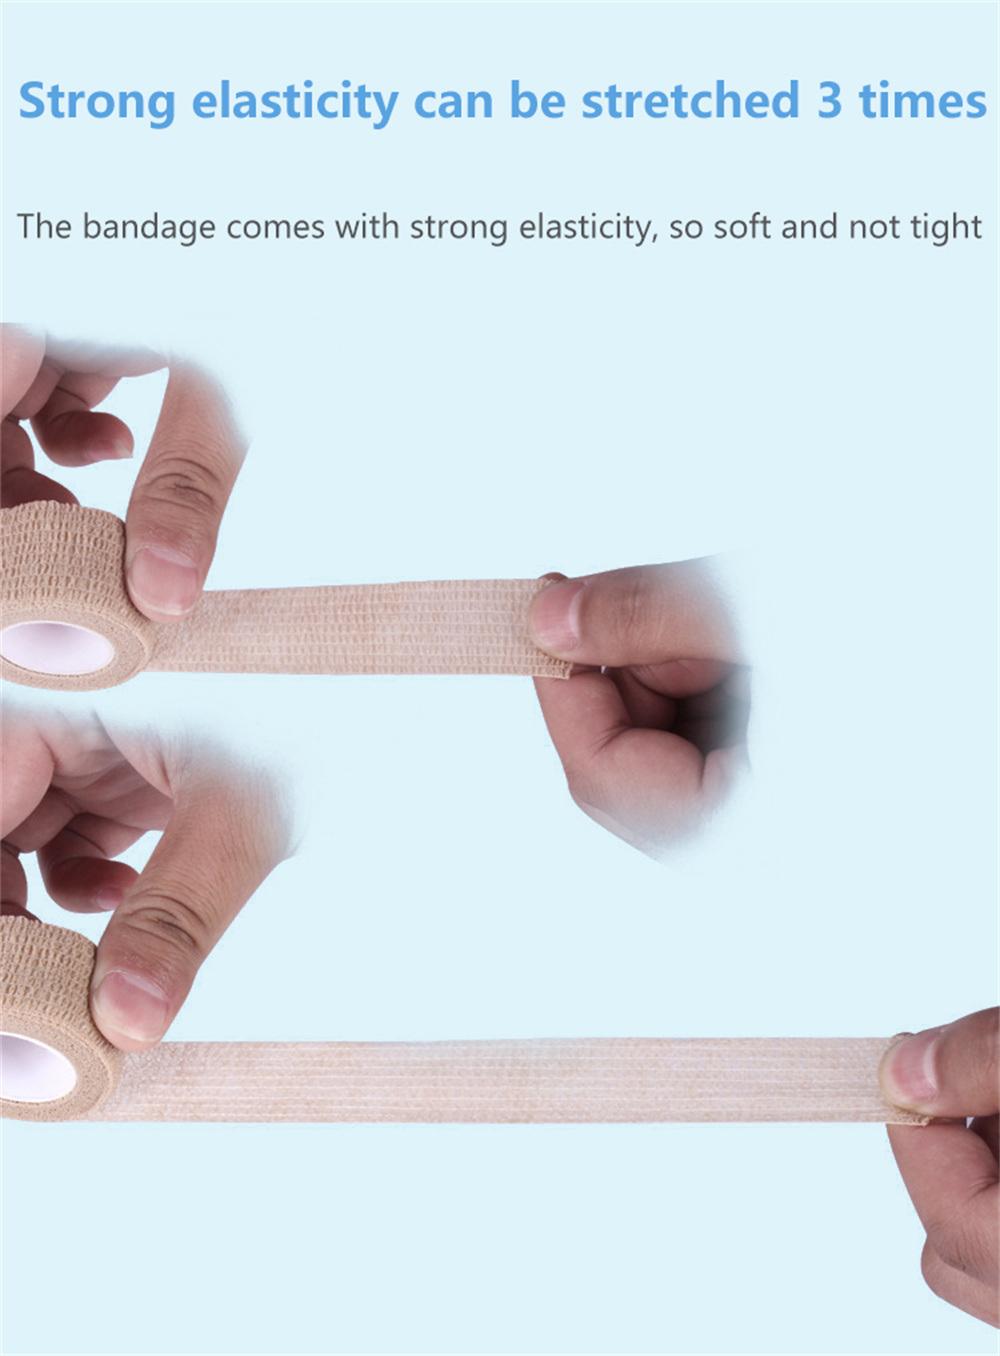 Self Adhesive Ankle Finger Muscles Care Elastic Medicalbandage Gauze Dressing Tape Sports Wrist Support